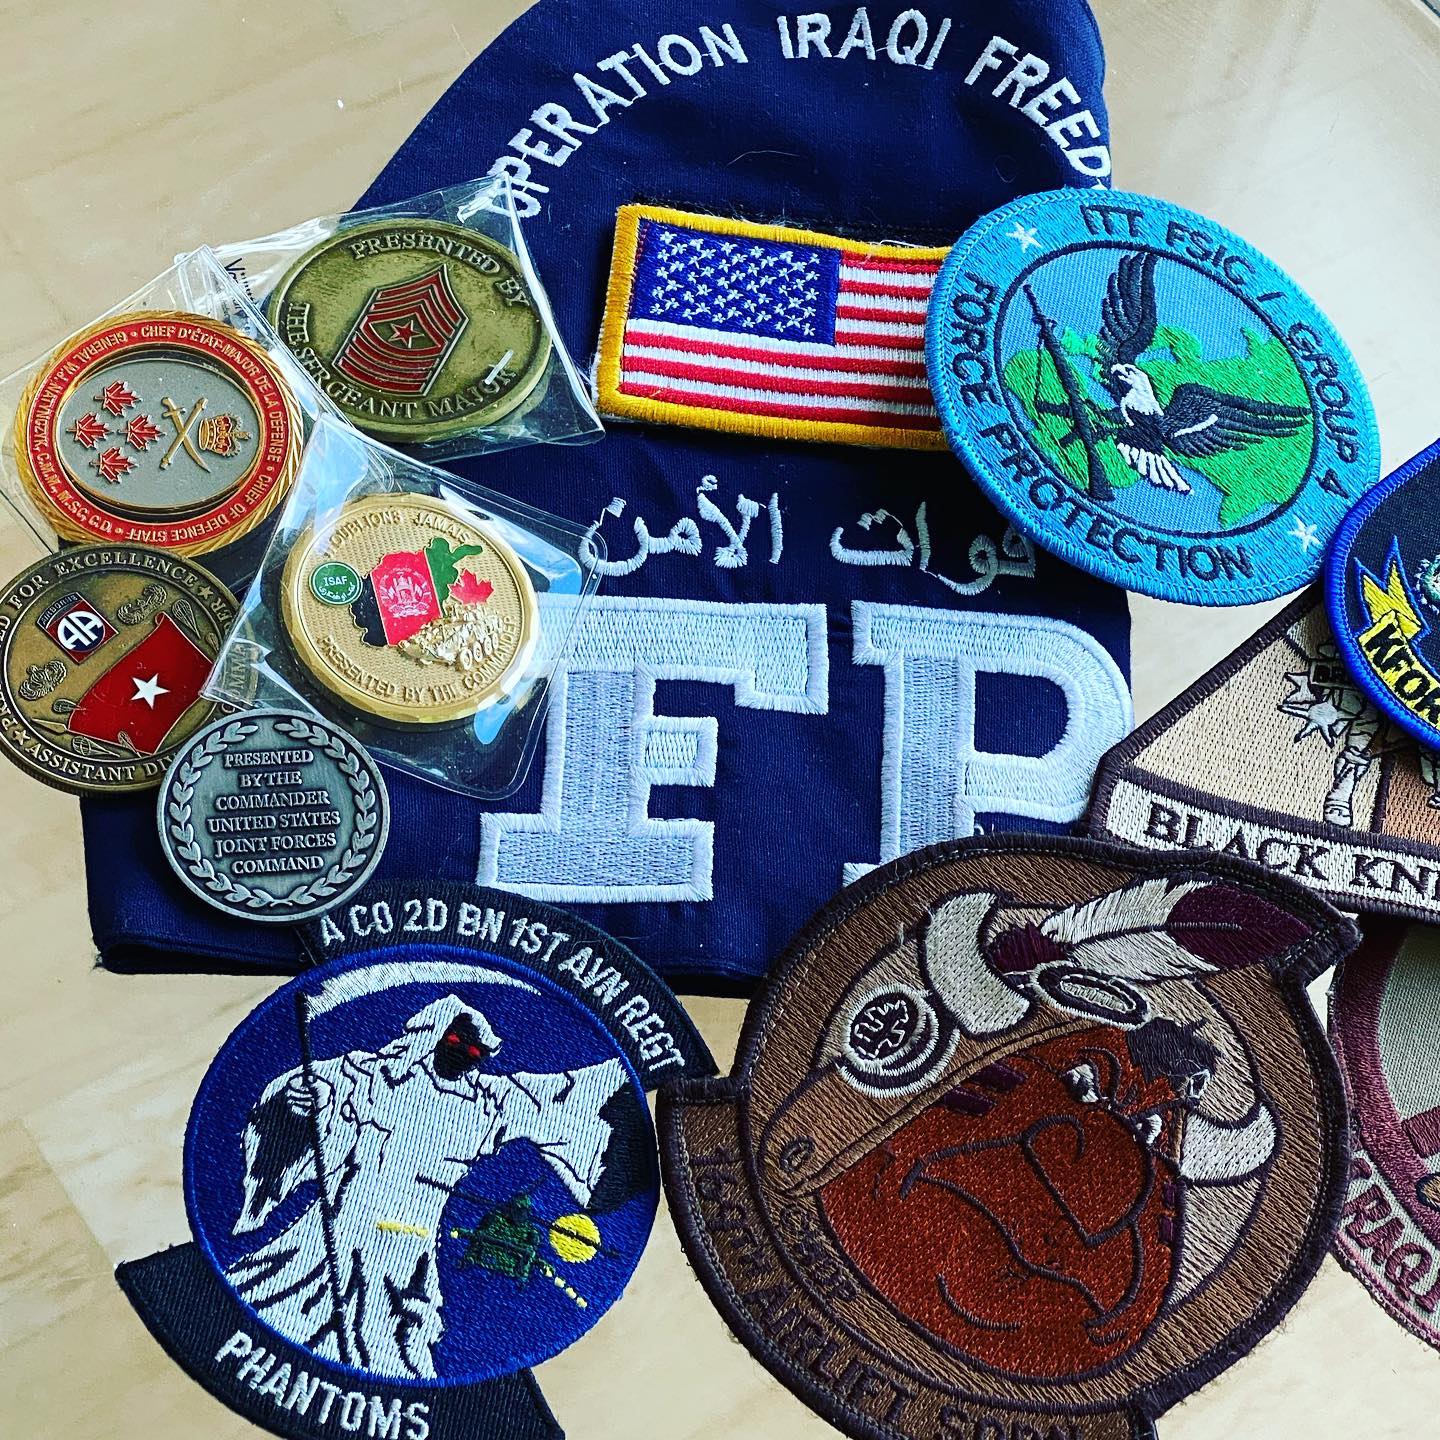 Thank you to the men and women serving in our armed forces here and around the world during this crisis.  Here are some coins and badges presented to me during several of my various USO tours performing comedy for the troops in and elsewhere.  Thank you for your service.  @canadianforces @usarmy @usmarinecorps @usairforce